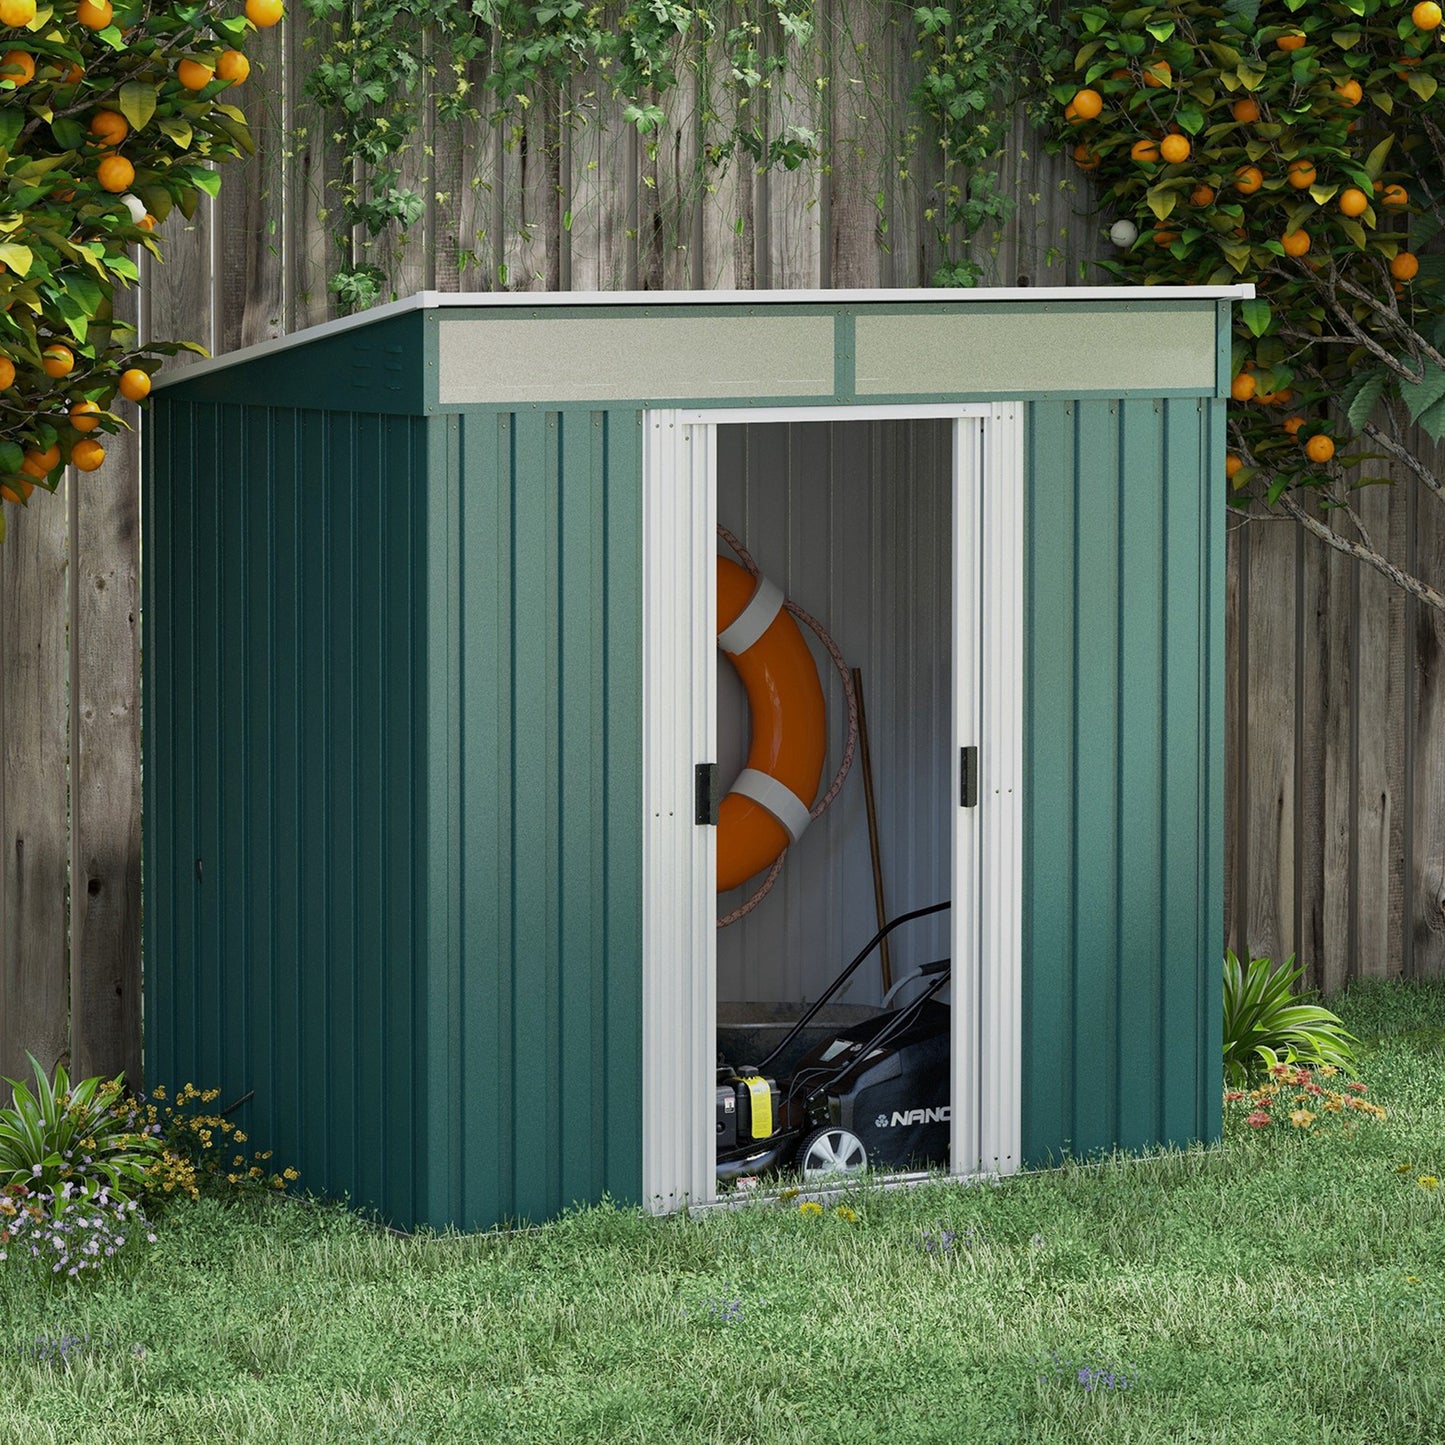 Outsunny 6.5 x 4FT Galvanised Metal Shed with Foundation, Lockable Tool Garden Shed with Double Sliding Doors and 2 Vents, Green